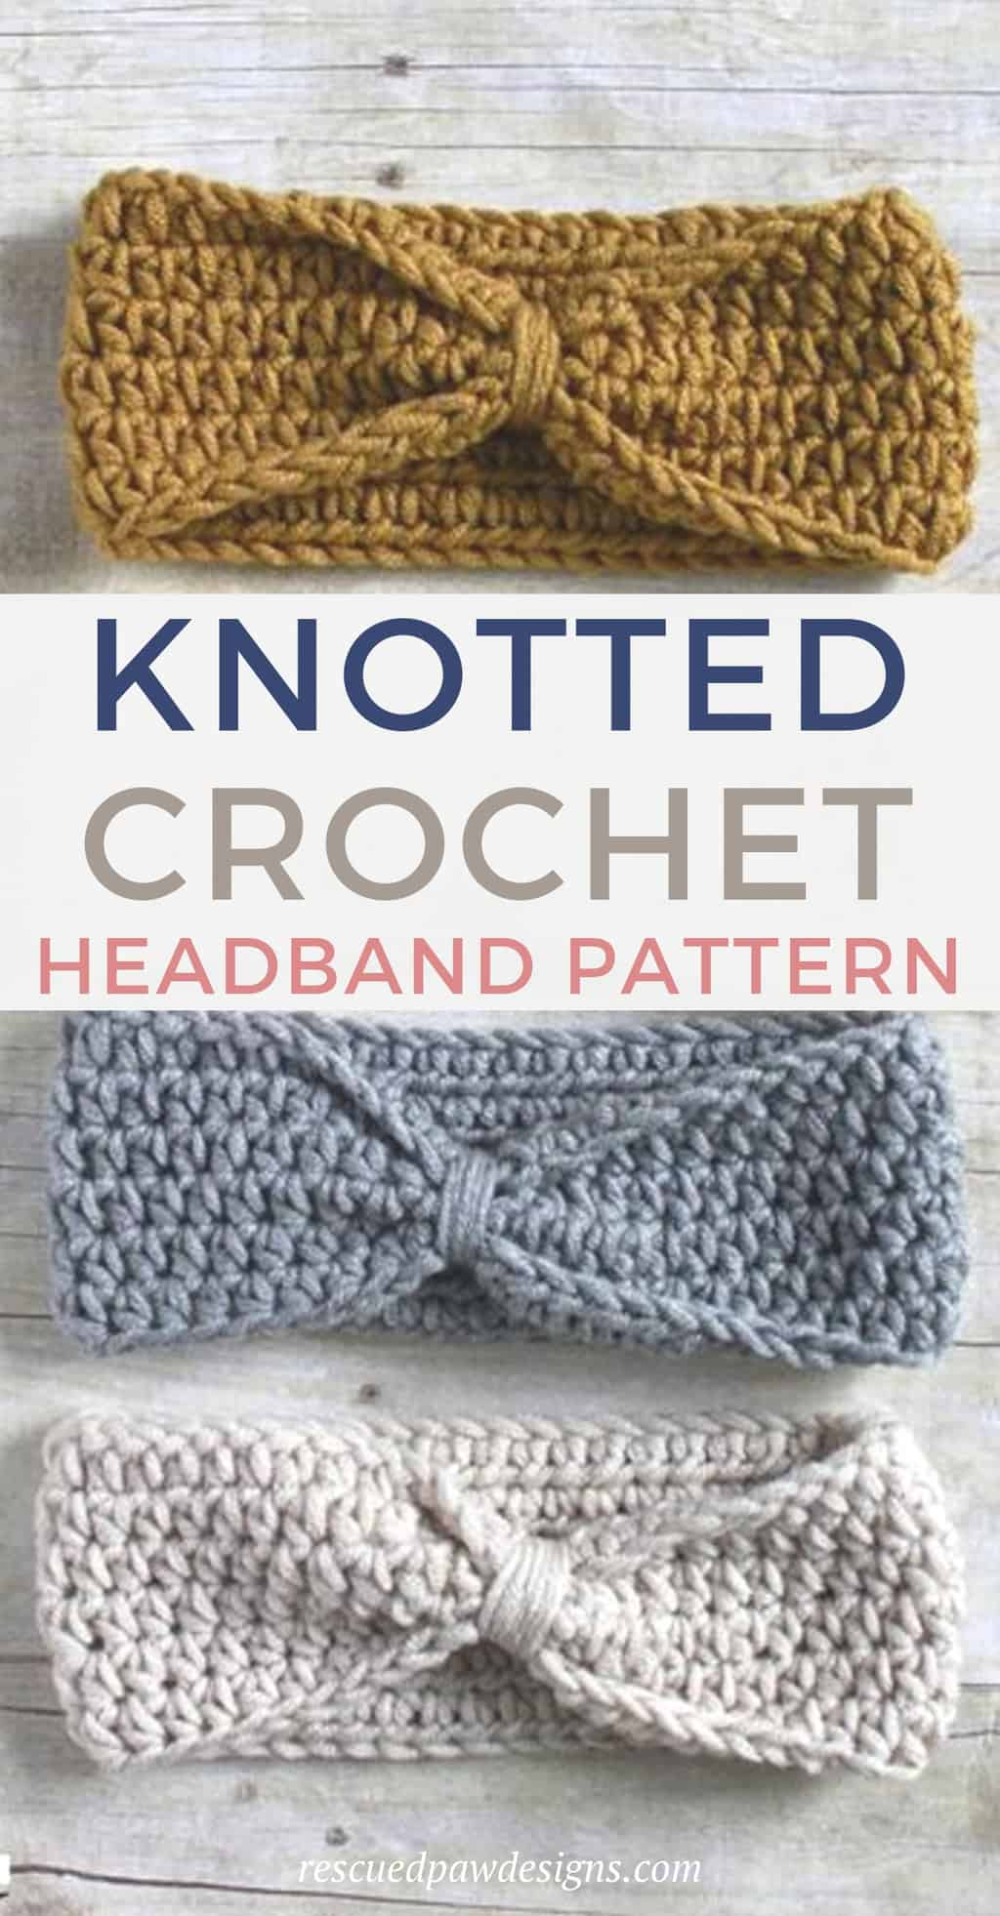 Free-Knotted-Headband-Crochet-Pattern-Rescued-Paw-Designs.png